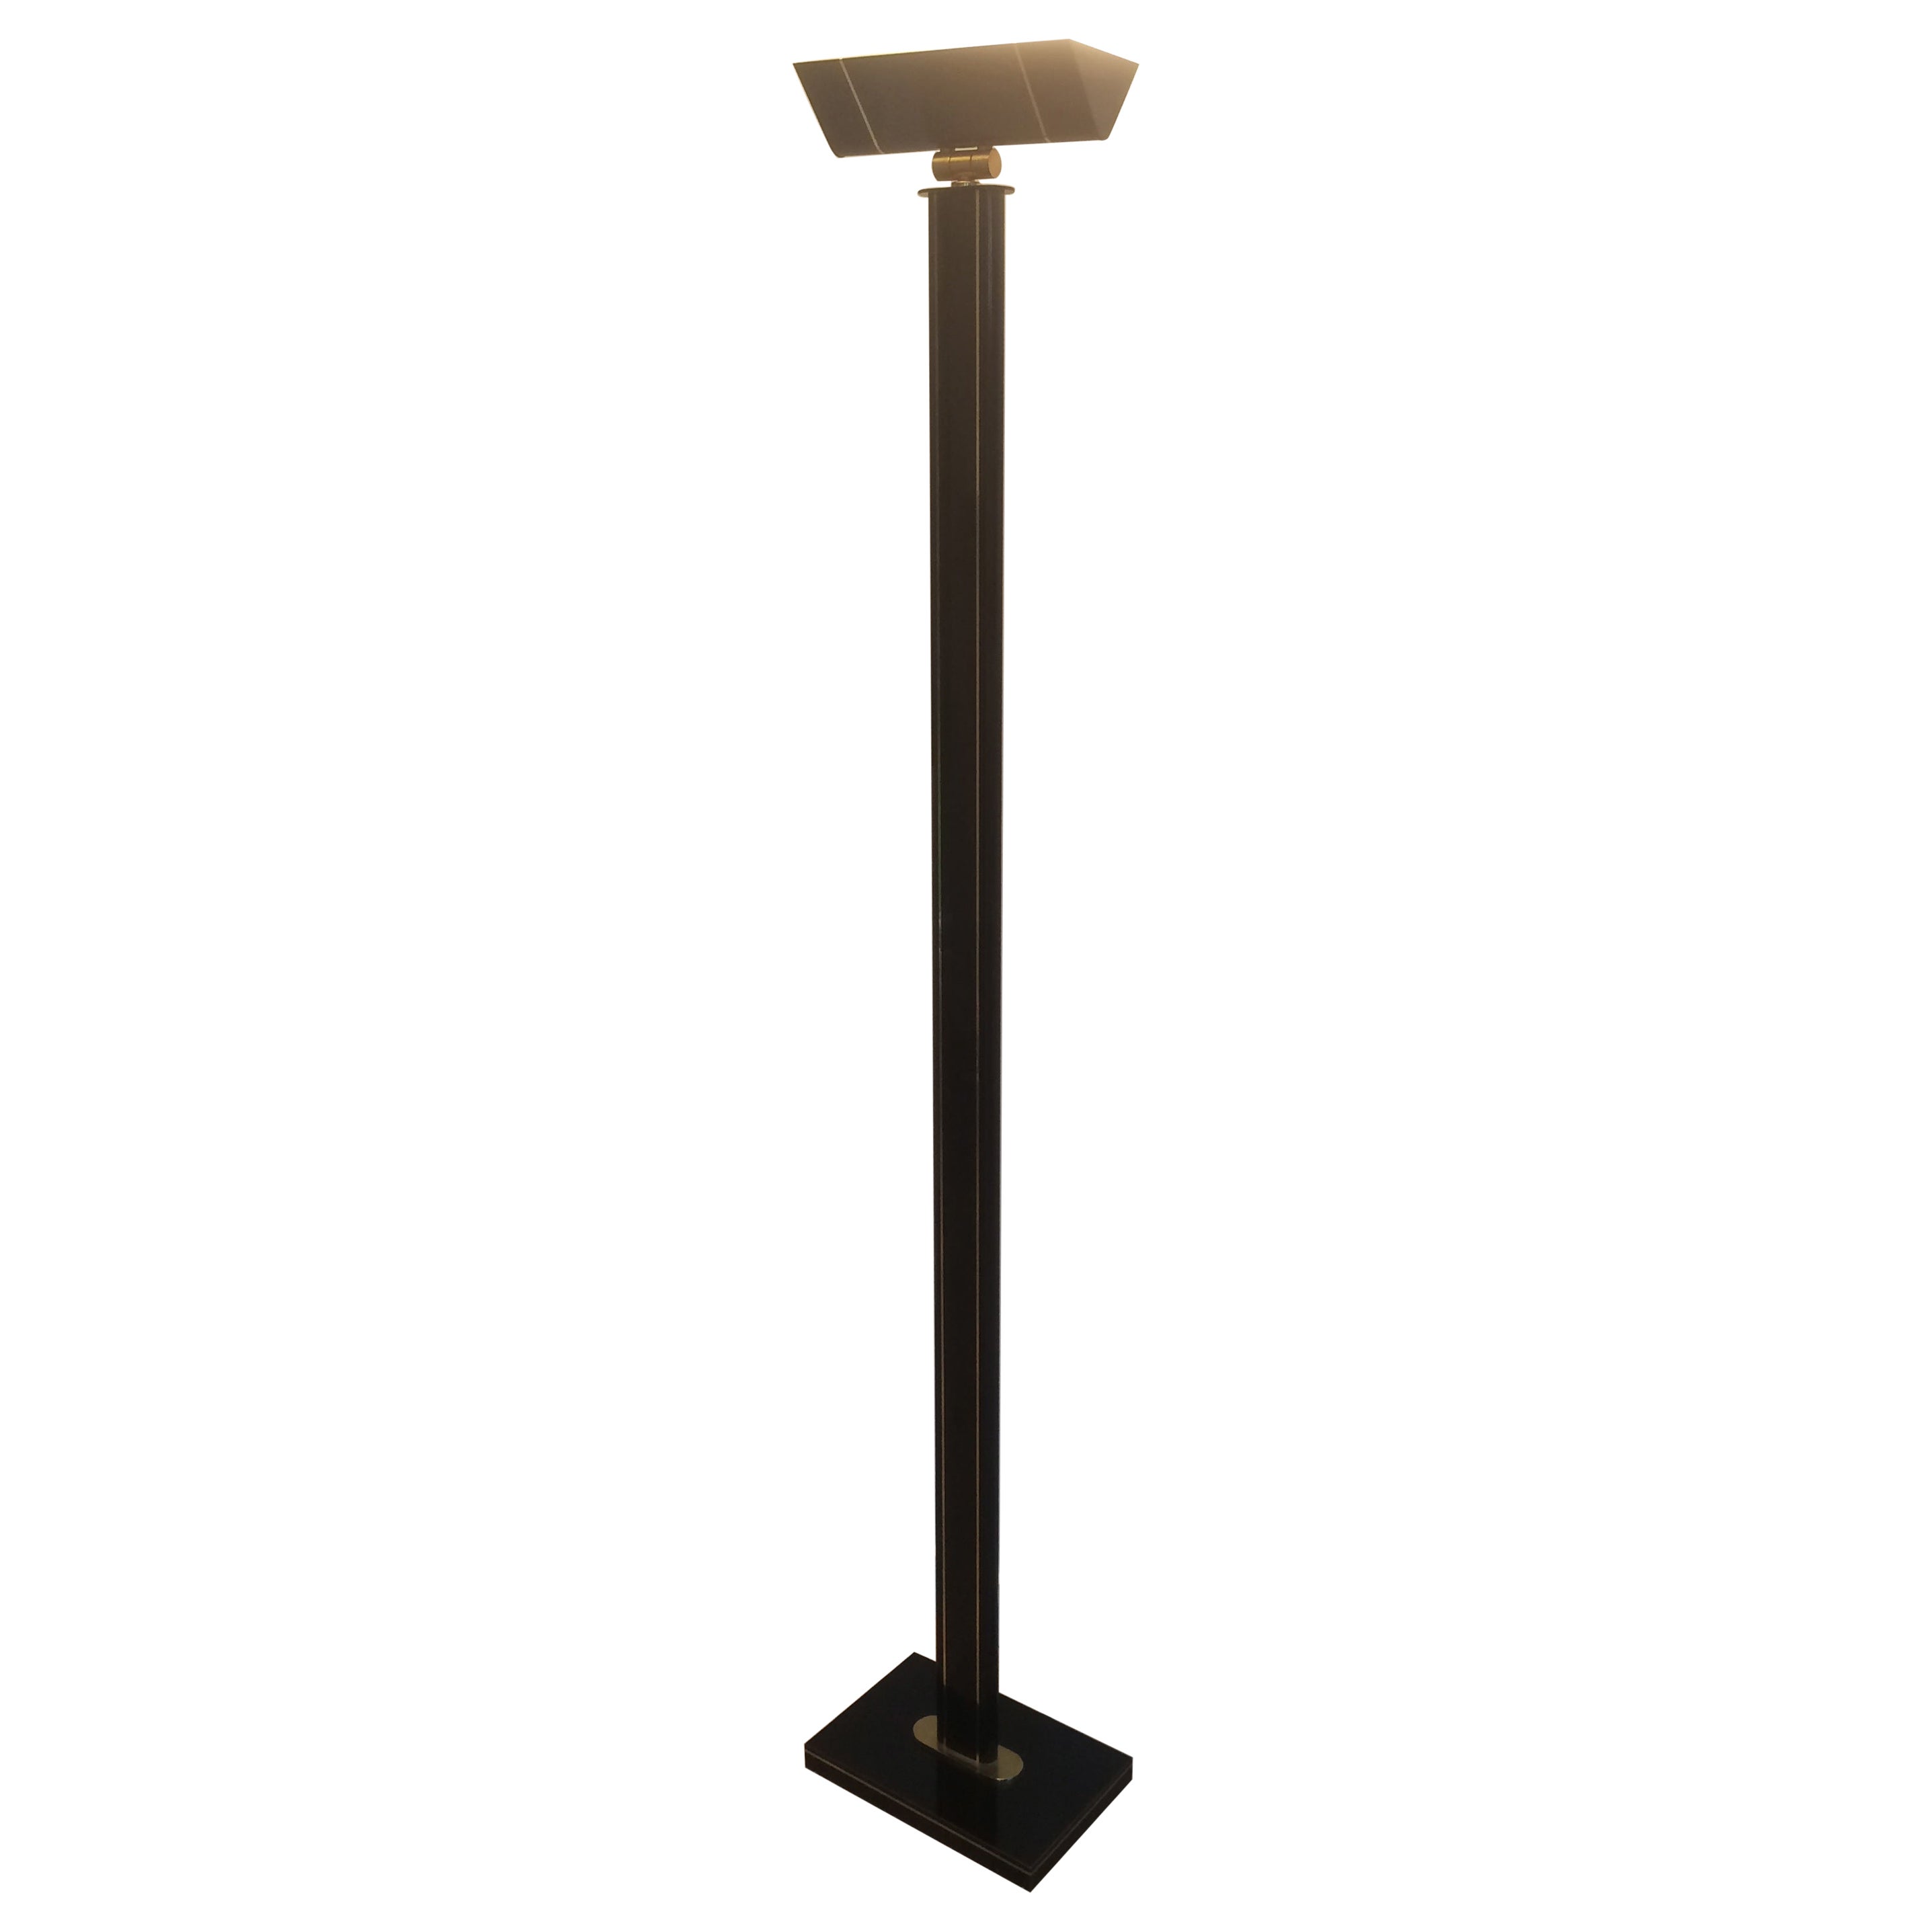 Black Lacquered and Brass Floor Lamp, French Work, Circa 1970